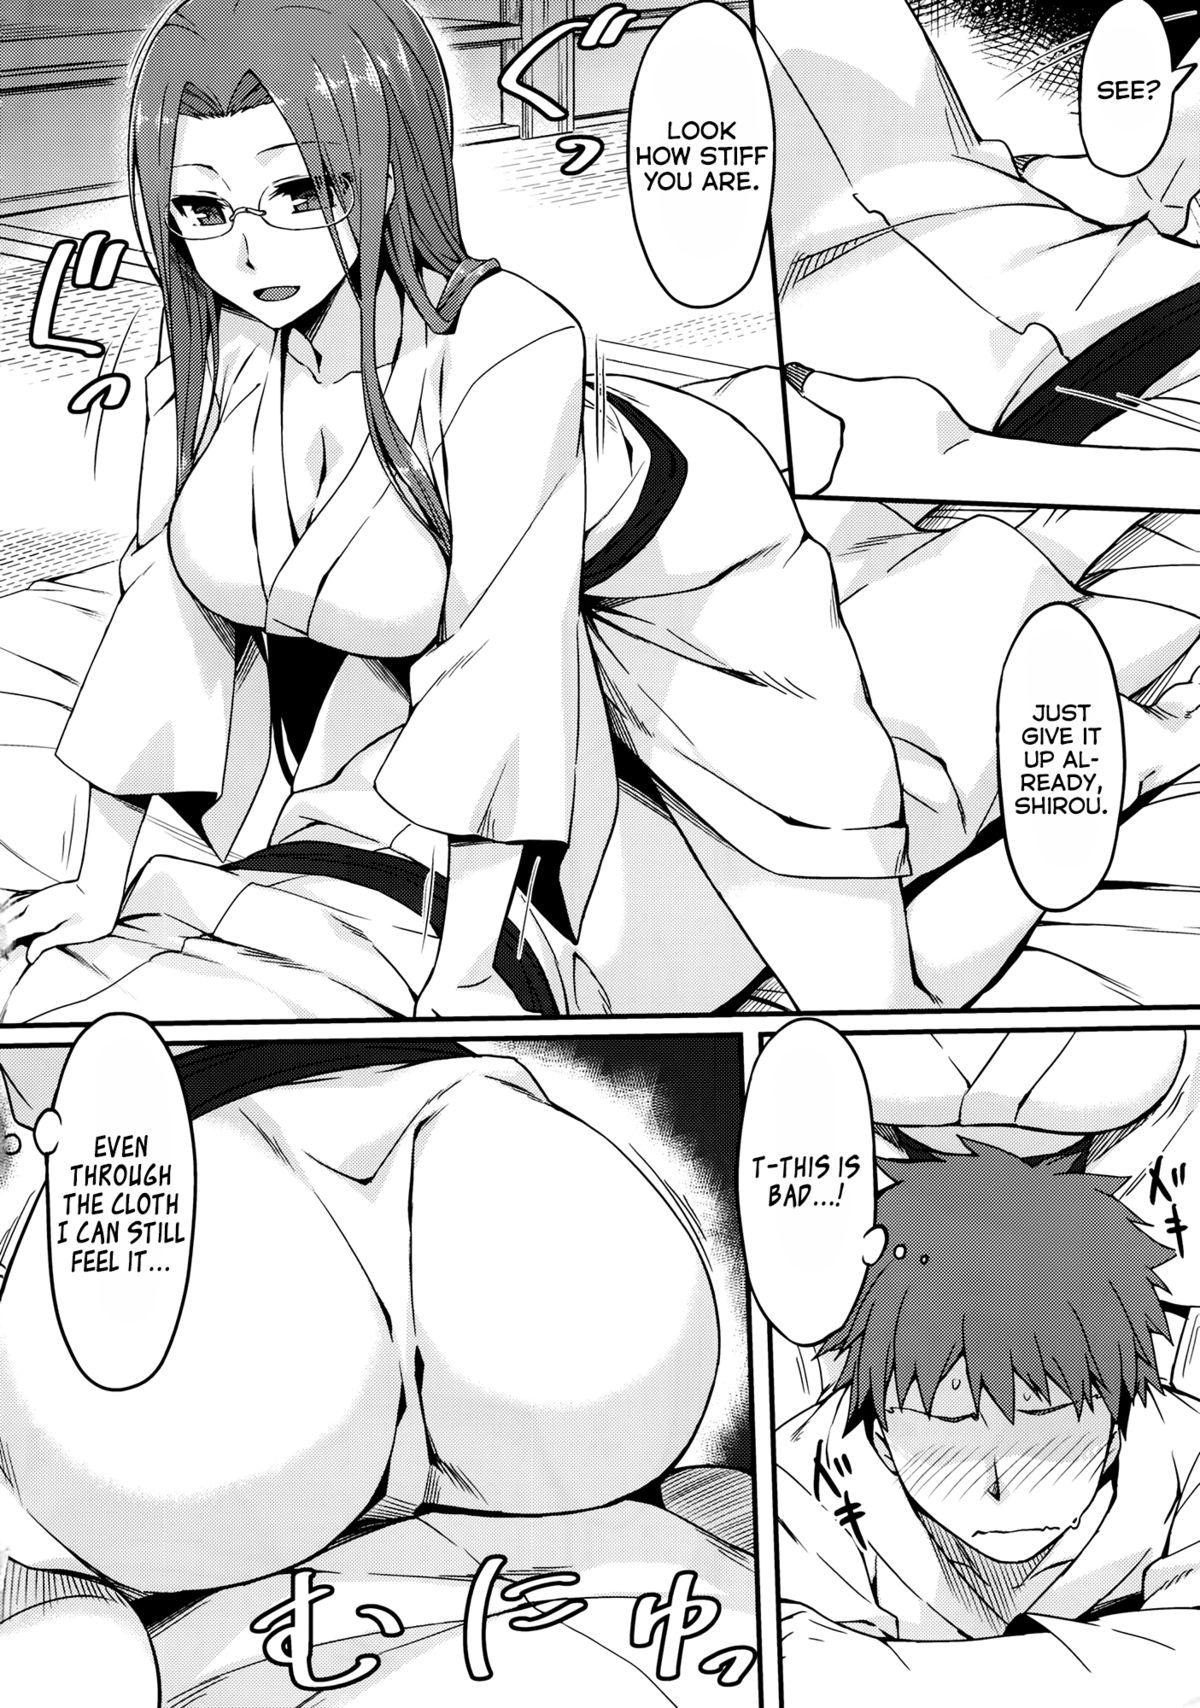 (C88) [S.S.L (Yanagi)] Rider-san to Onsen Yado. Sonogo | Hot Spring Inn With Rider-san. After Story (Fate/stay night) [English] [Facedesk] 3